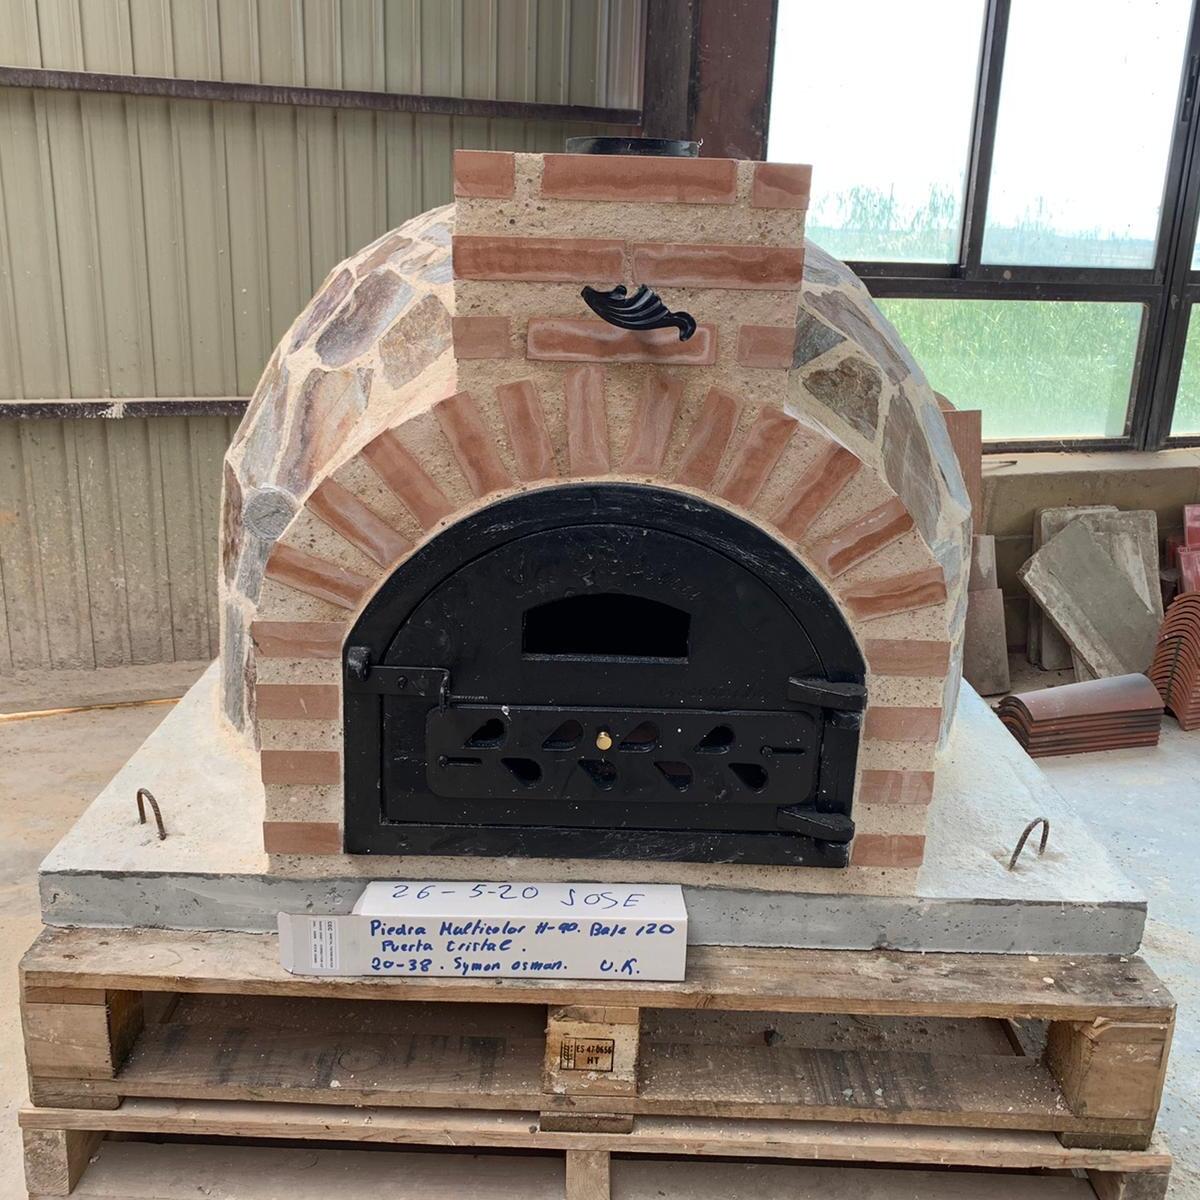 Fuego Wood Fired Ovens 5 star review on 2nd July 2020